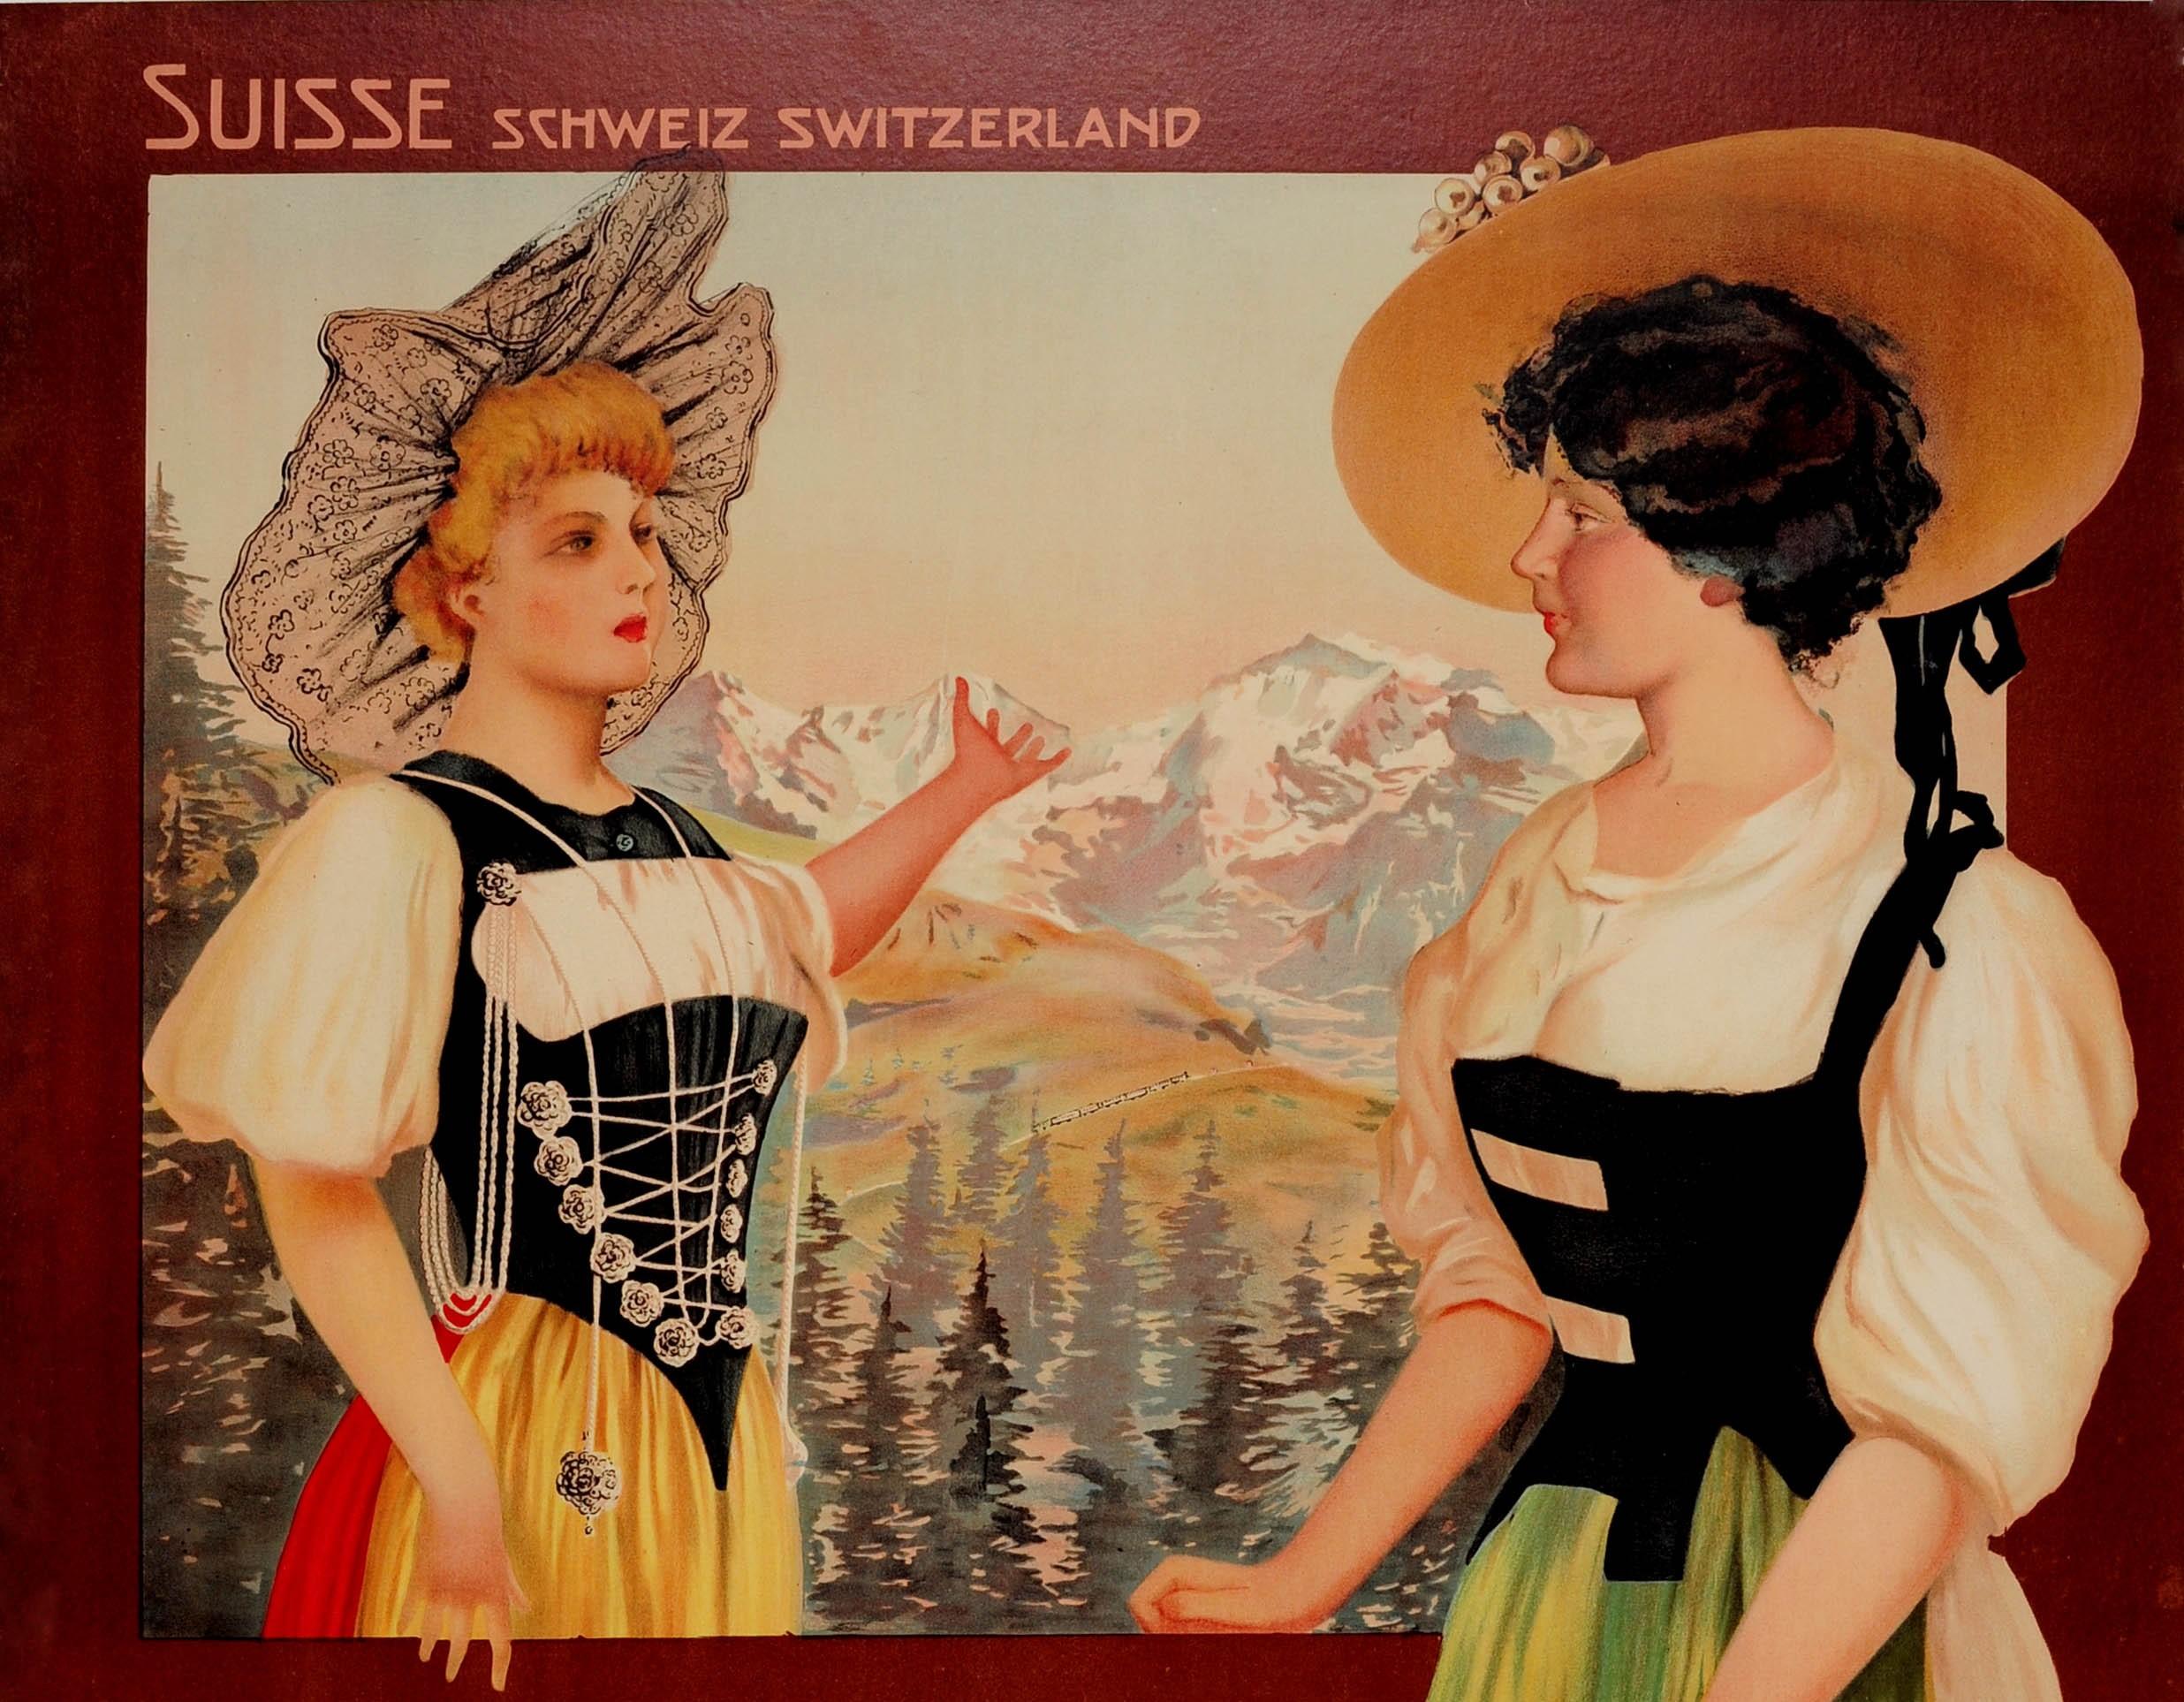 Large original antique travel advertising poster for the Montreux Oberland Bernois / MOB Railway Chemin de Fer Electrique - wagons restaurants - Suisse Schweiz Switzerland. Great image featuring a lady wearing traditional clothing and a hat looking